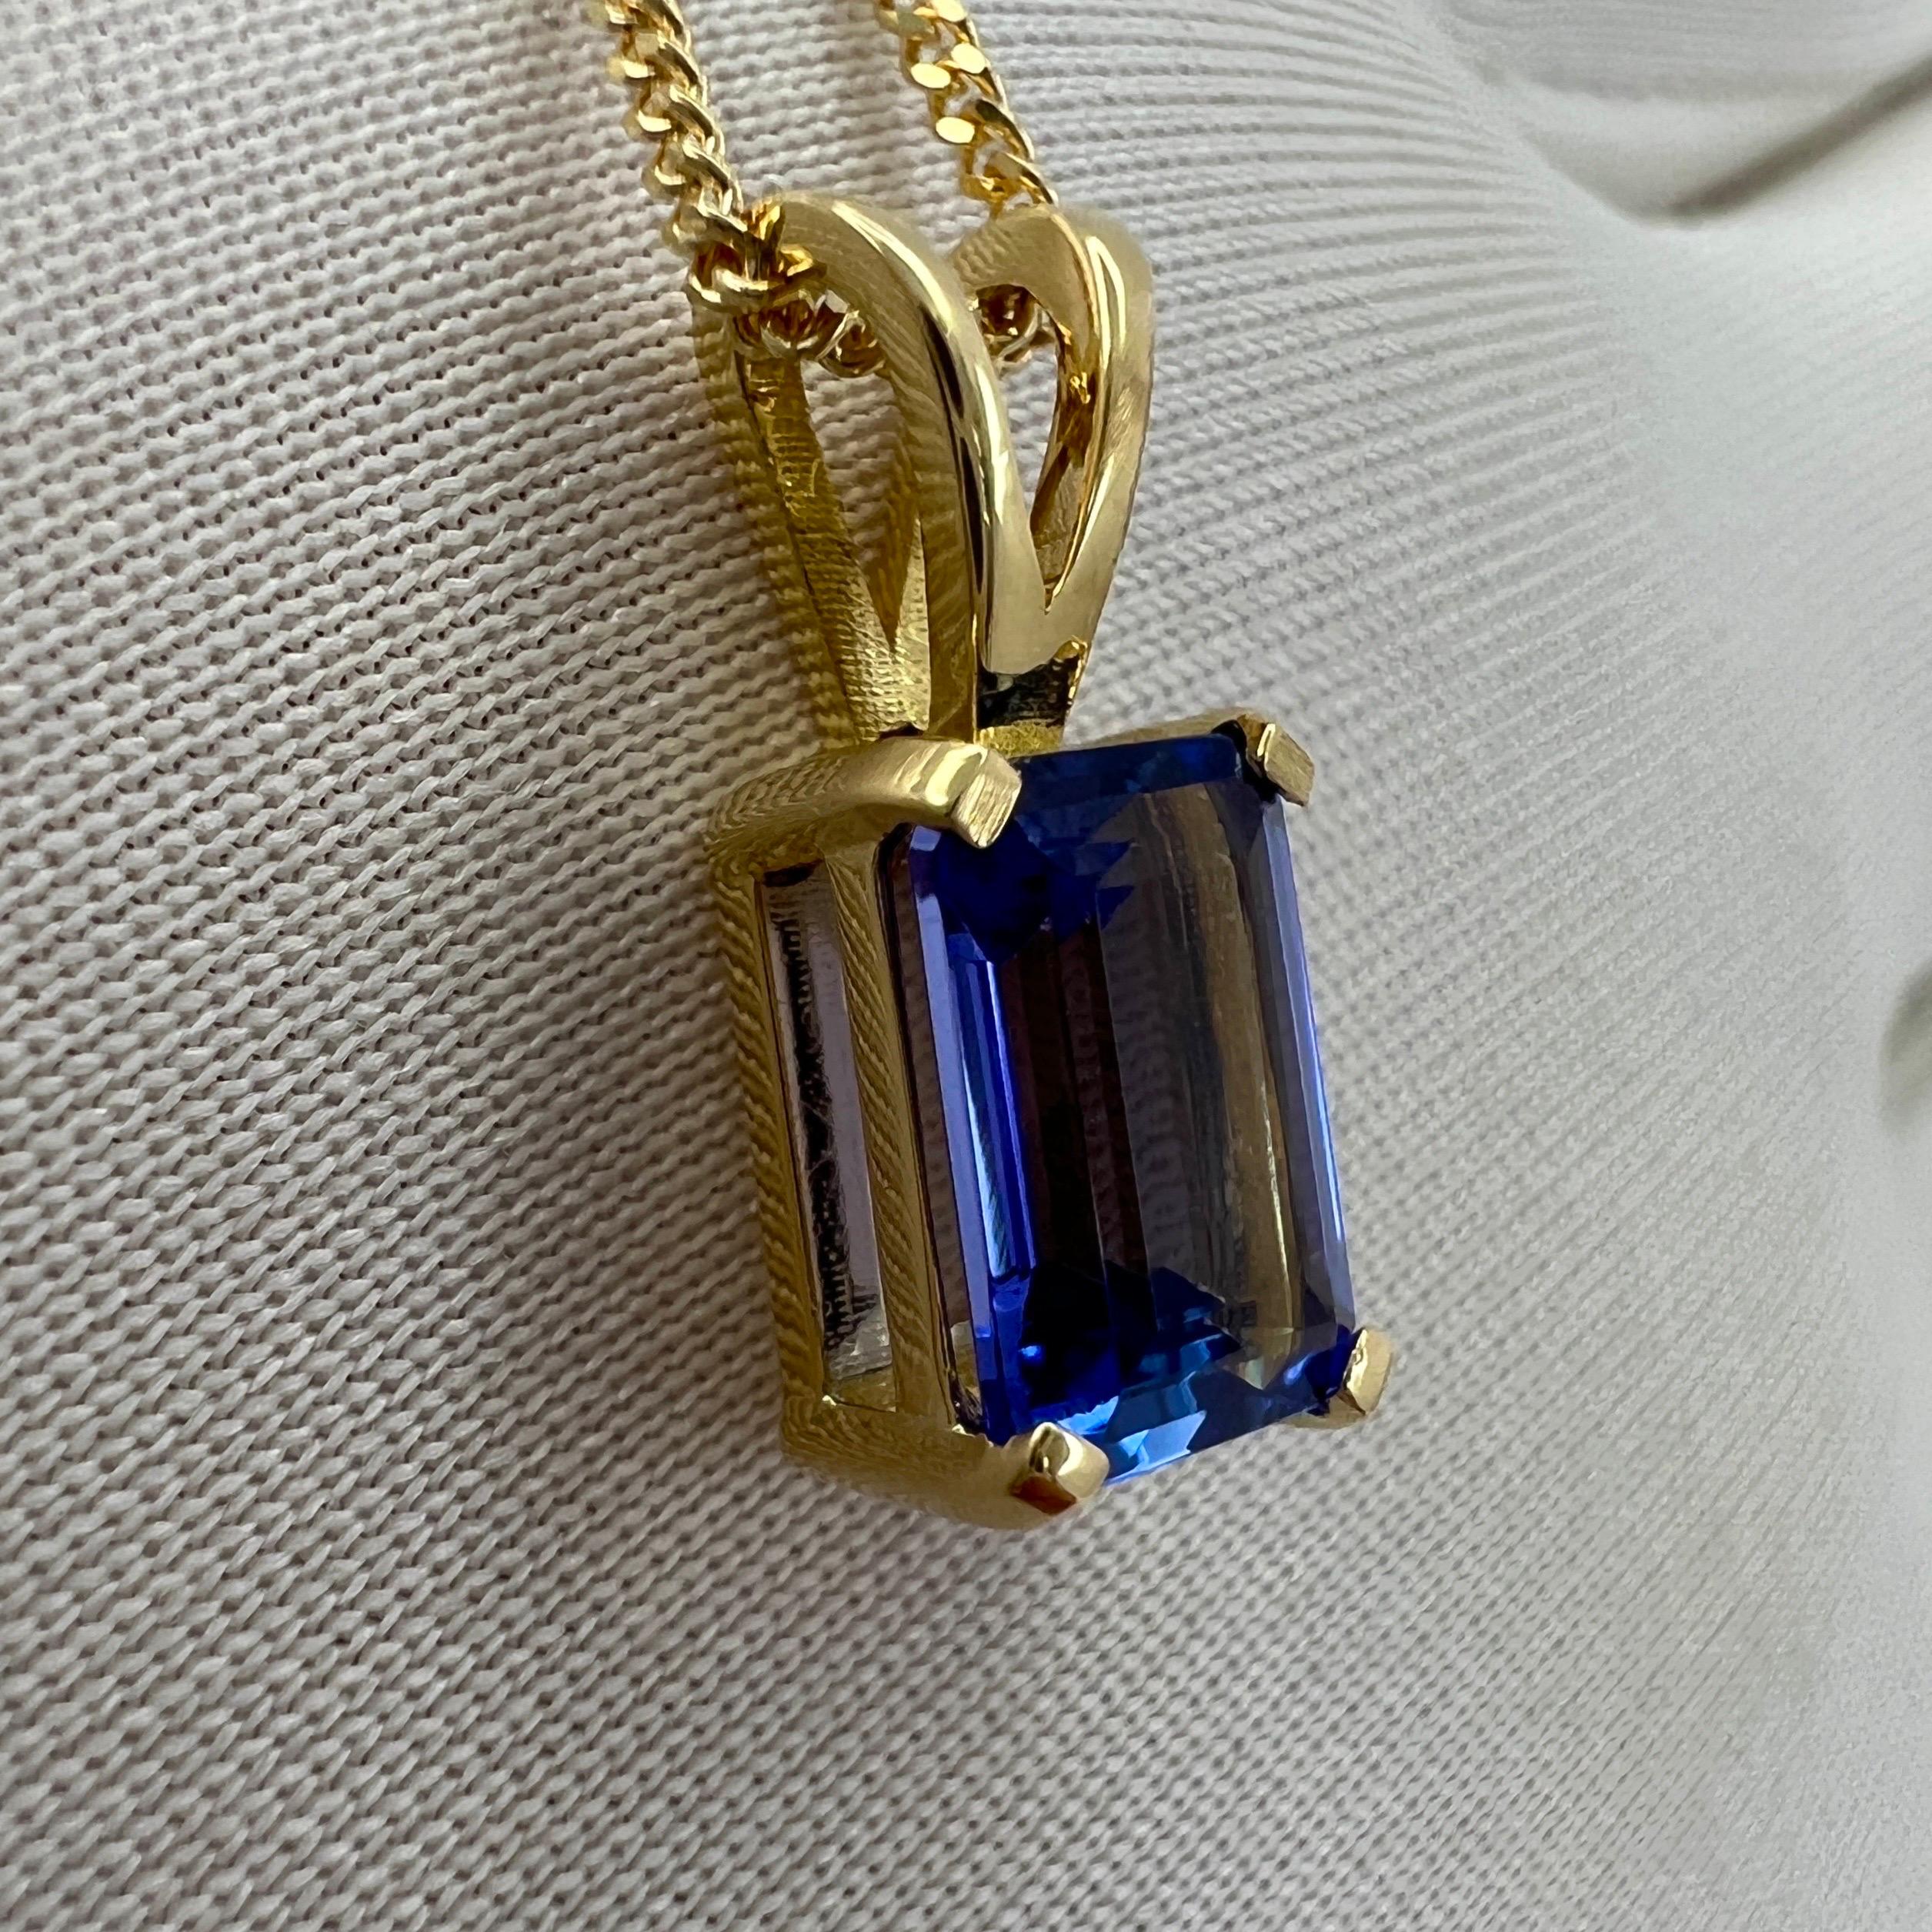 Vivid Blue Violet Natural Tanzanite Solitaire Pendant Necklace. 

1.32 Carat stone with vivid blue violet colour and excellent clarity, very clean stone practically flawless.
Also has an excellent emerald octagonal cut showing lots of brightness and